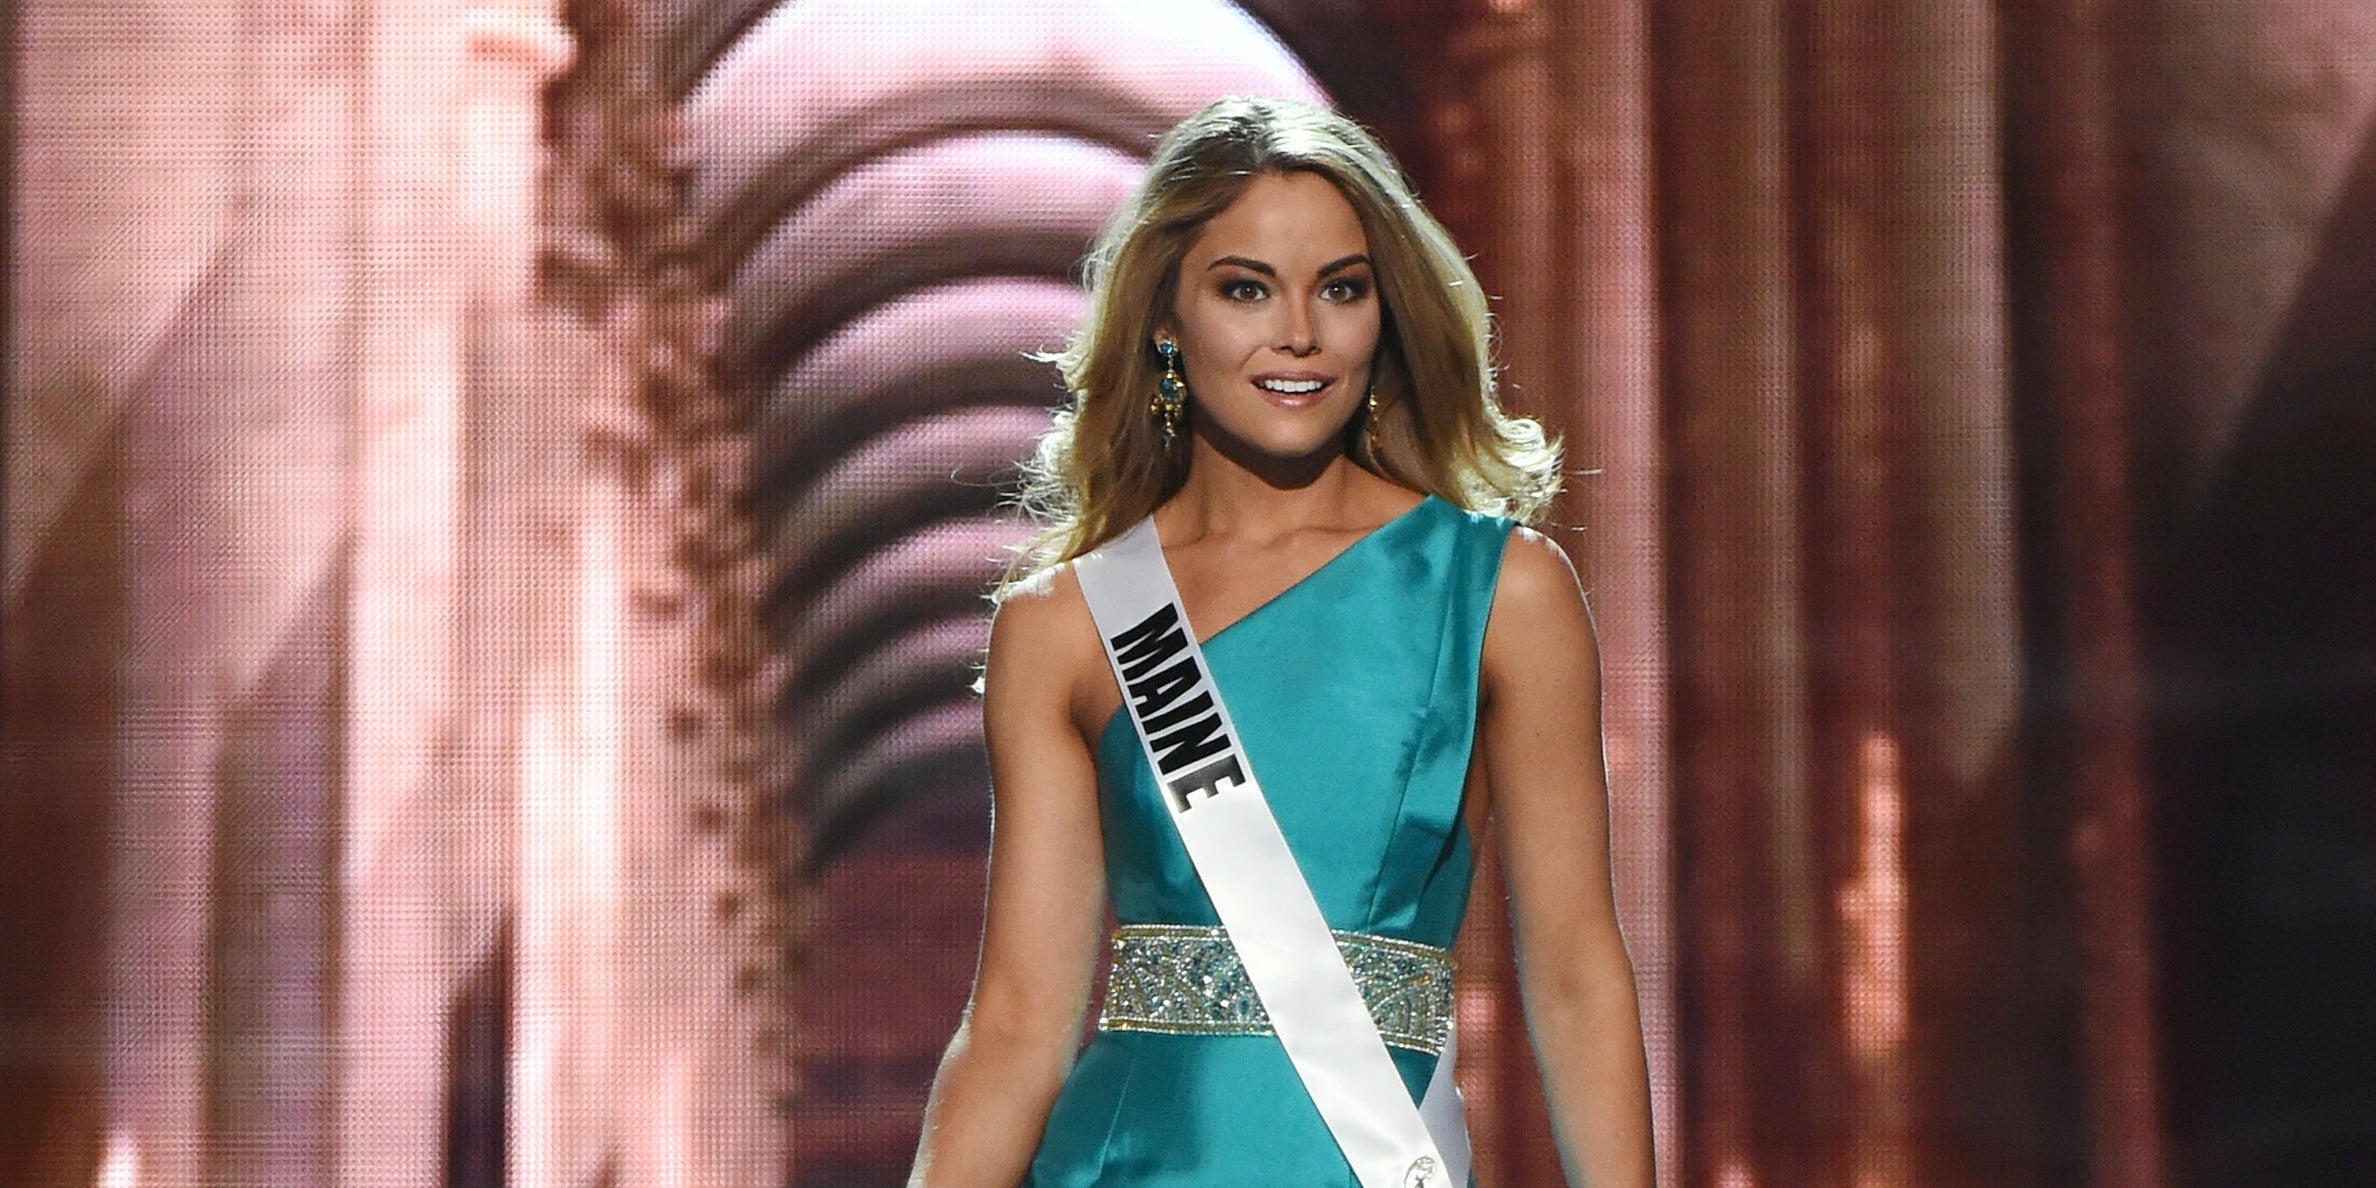 Marisa Butler competes in the evening gown competition during the 2016 Miss USA pageant preliminary competition